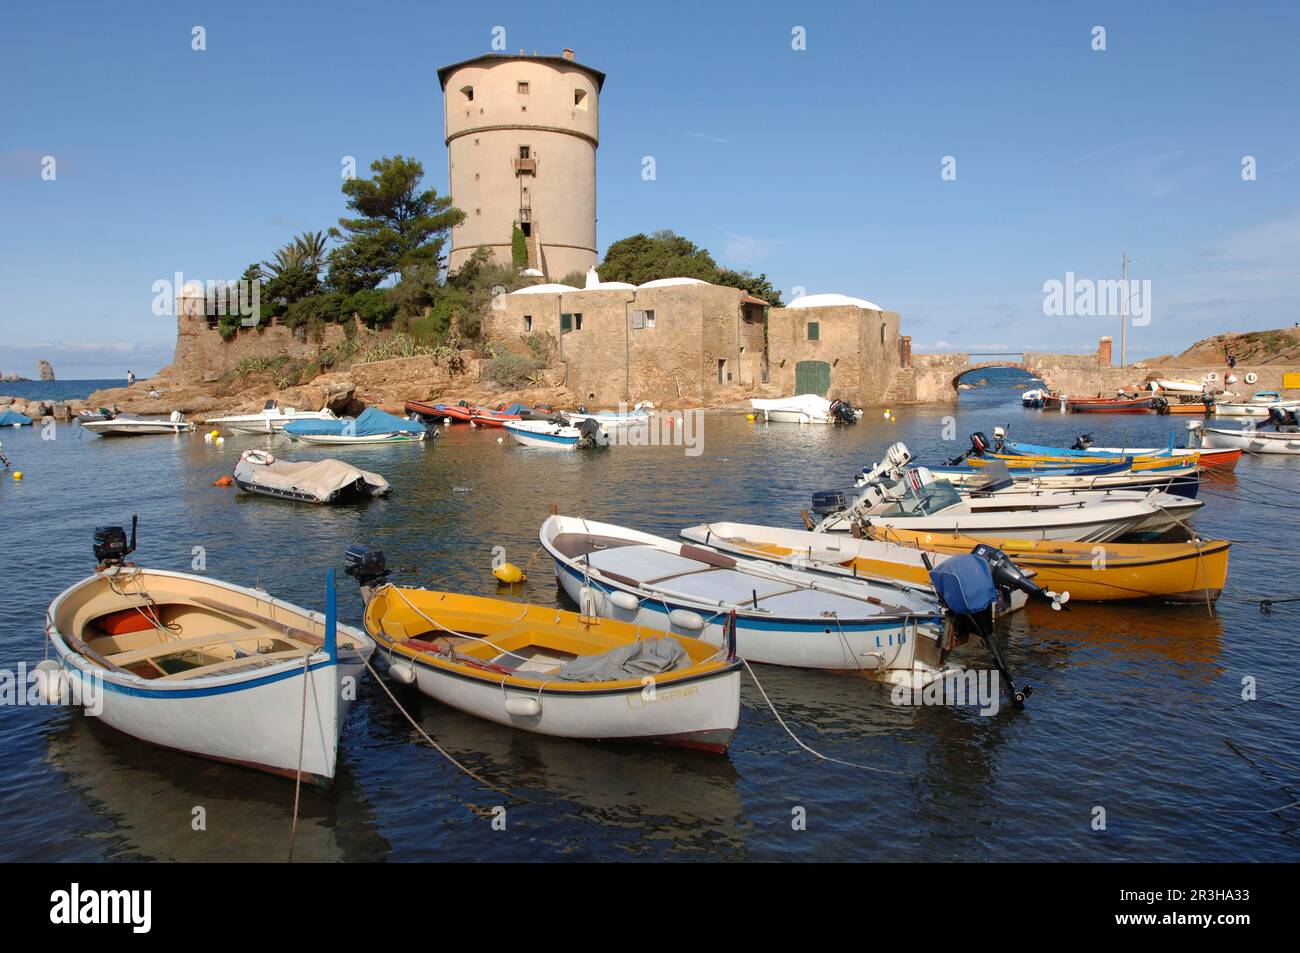 Fortified defence tower, Porto Campese Castle, Isola del Giglio, Tuscany, Italy Stock Photo